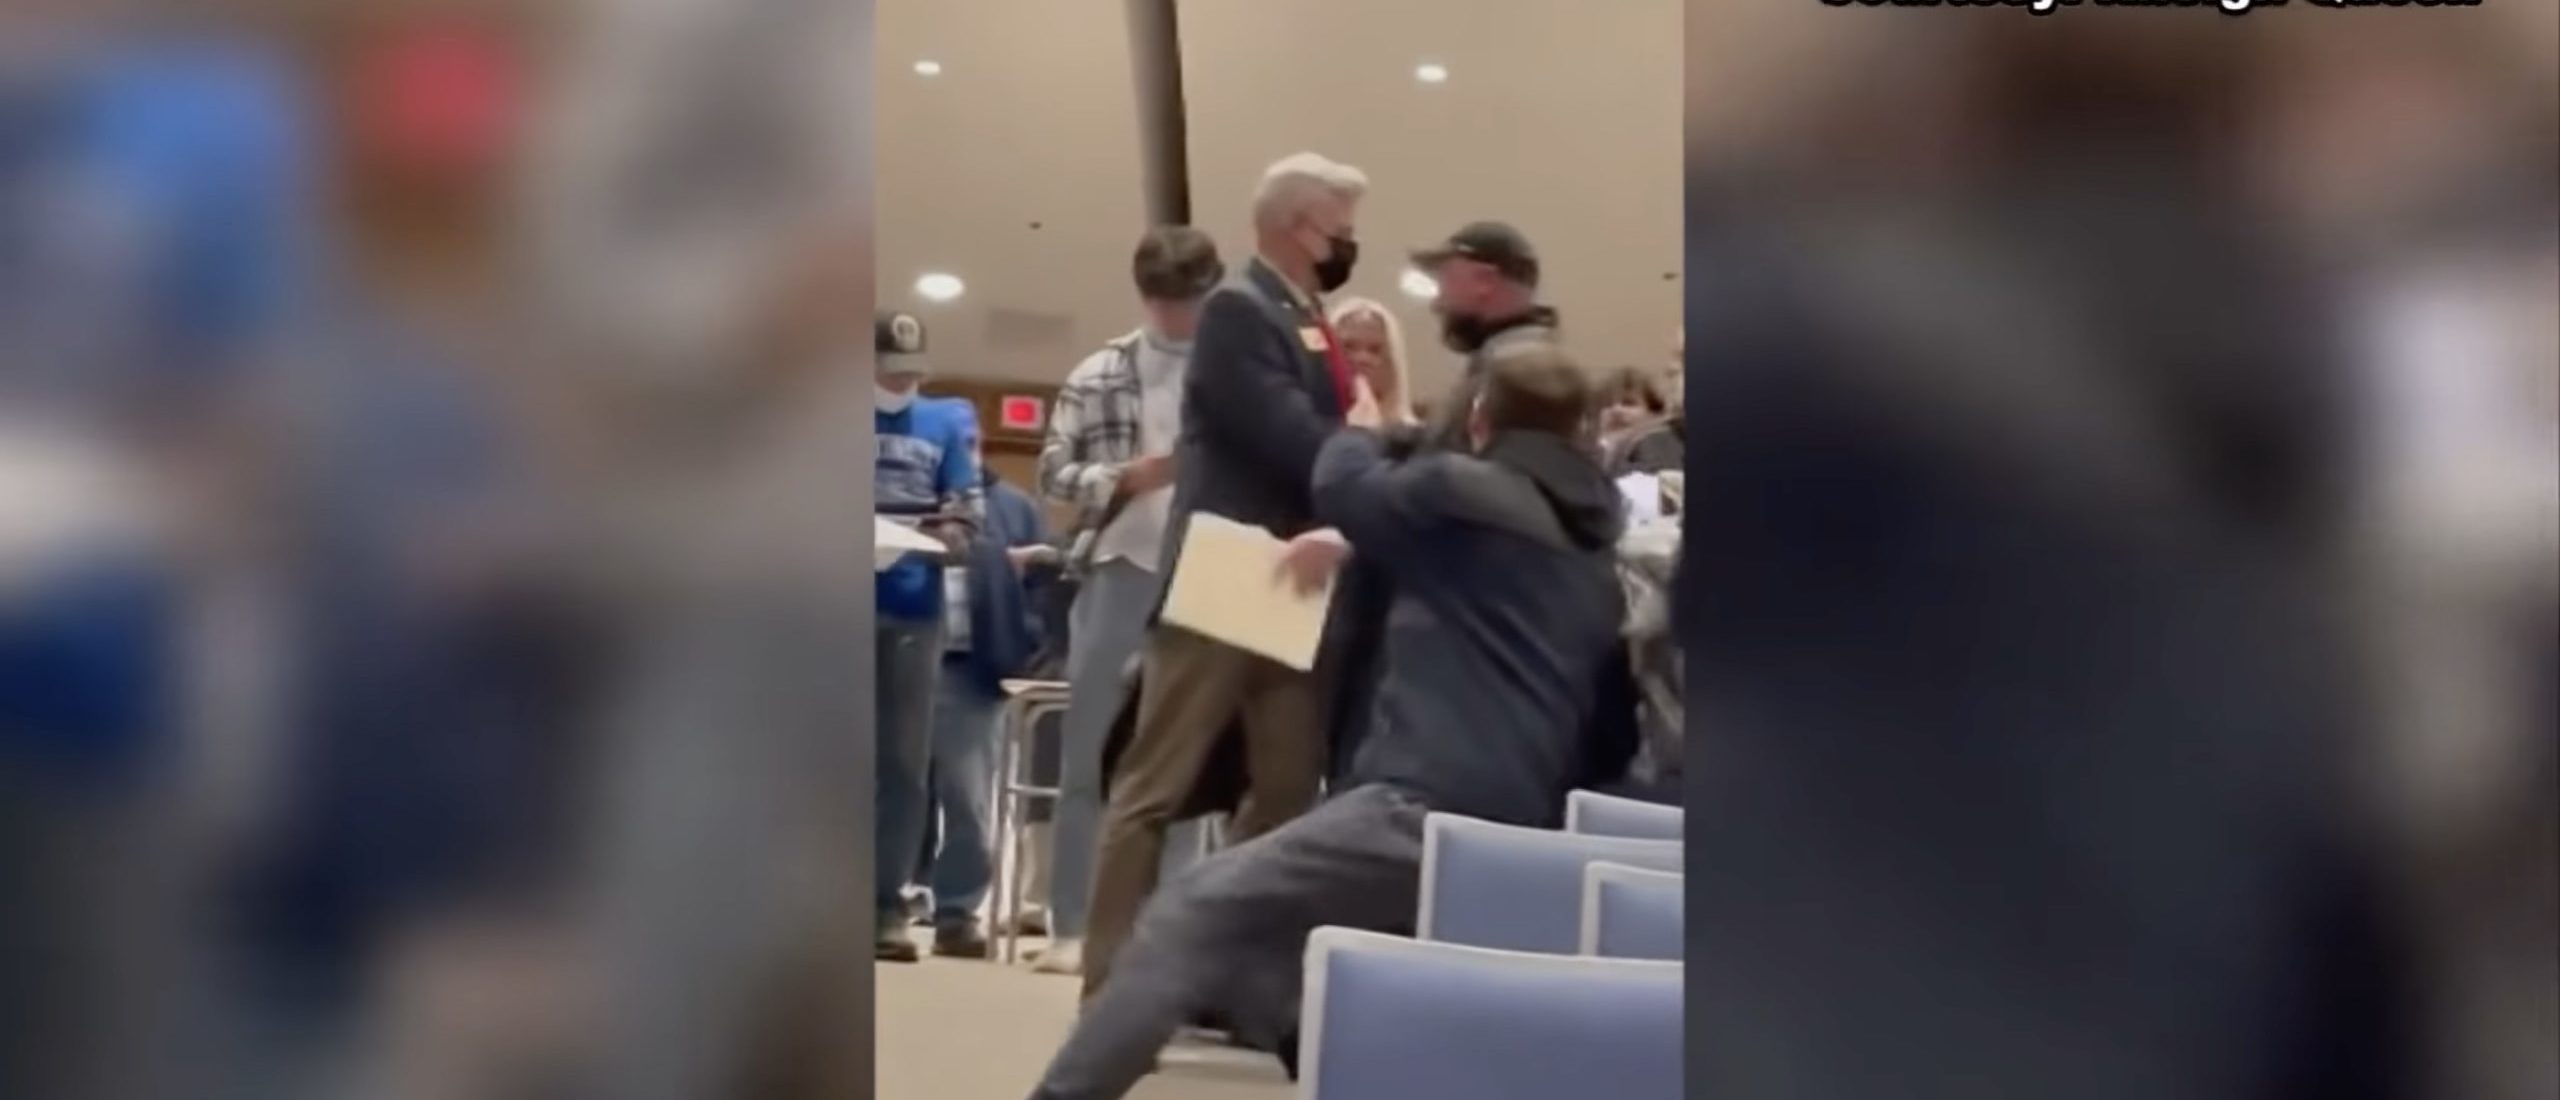 Heated Confrontation At A School Board Meeting Ends Early When A Board